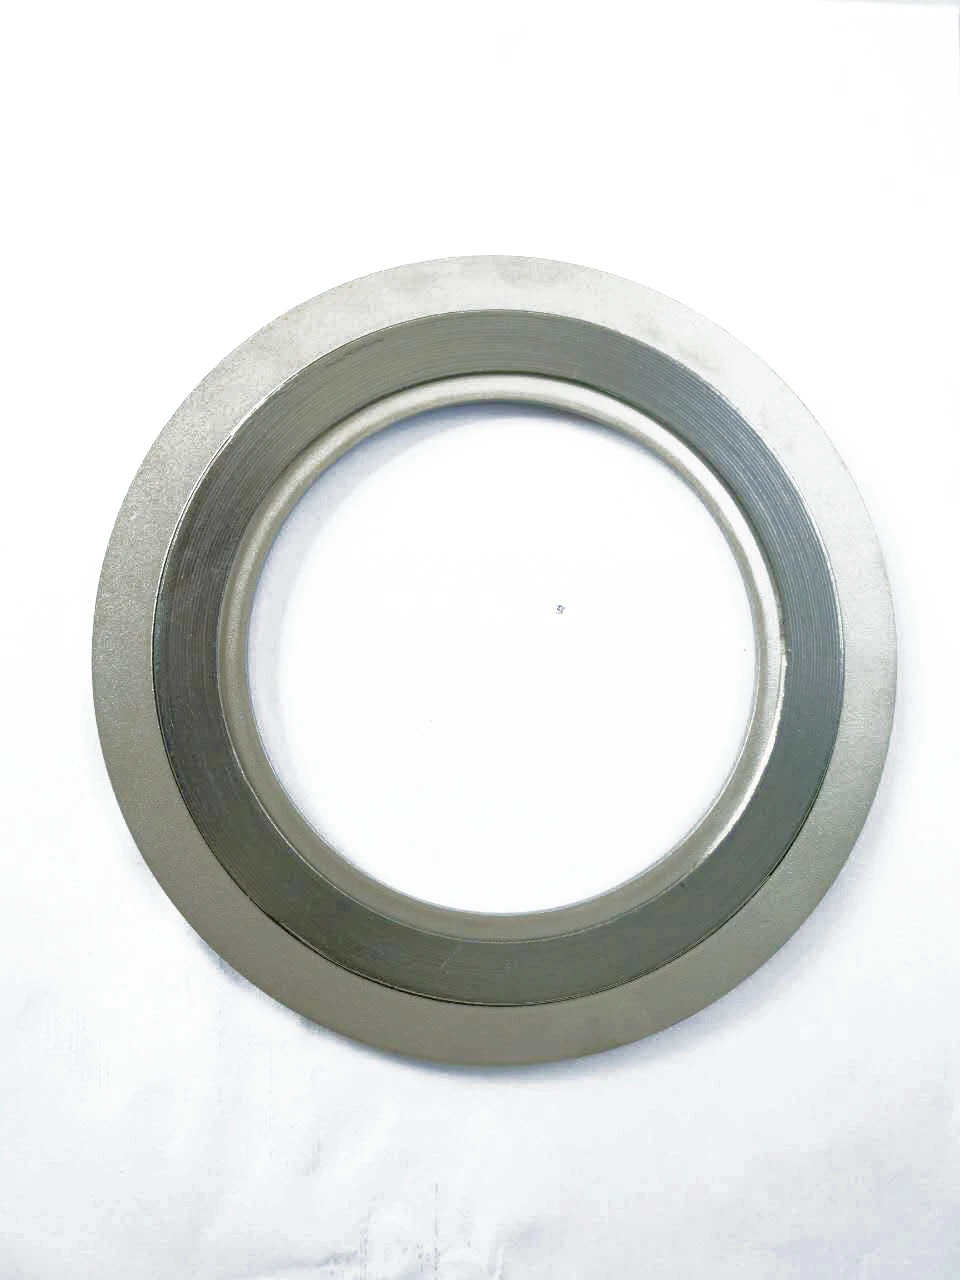 Spiral Wound Gasket - PTFE with Metal